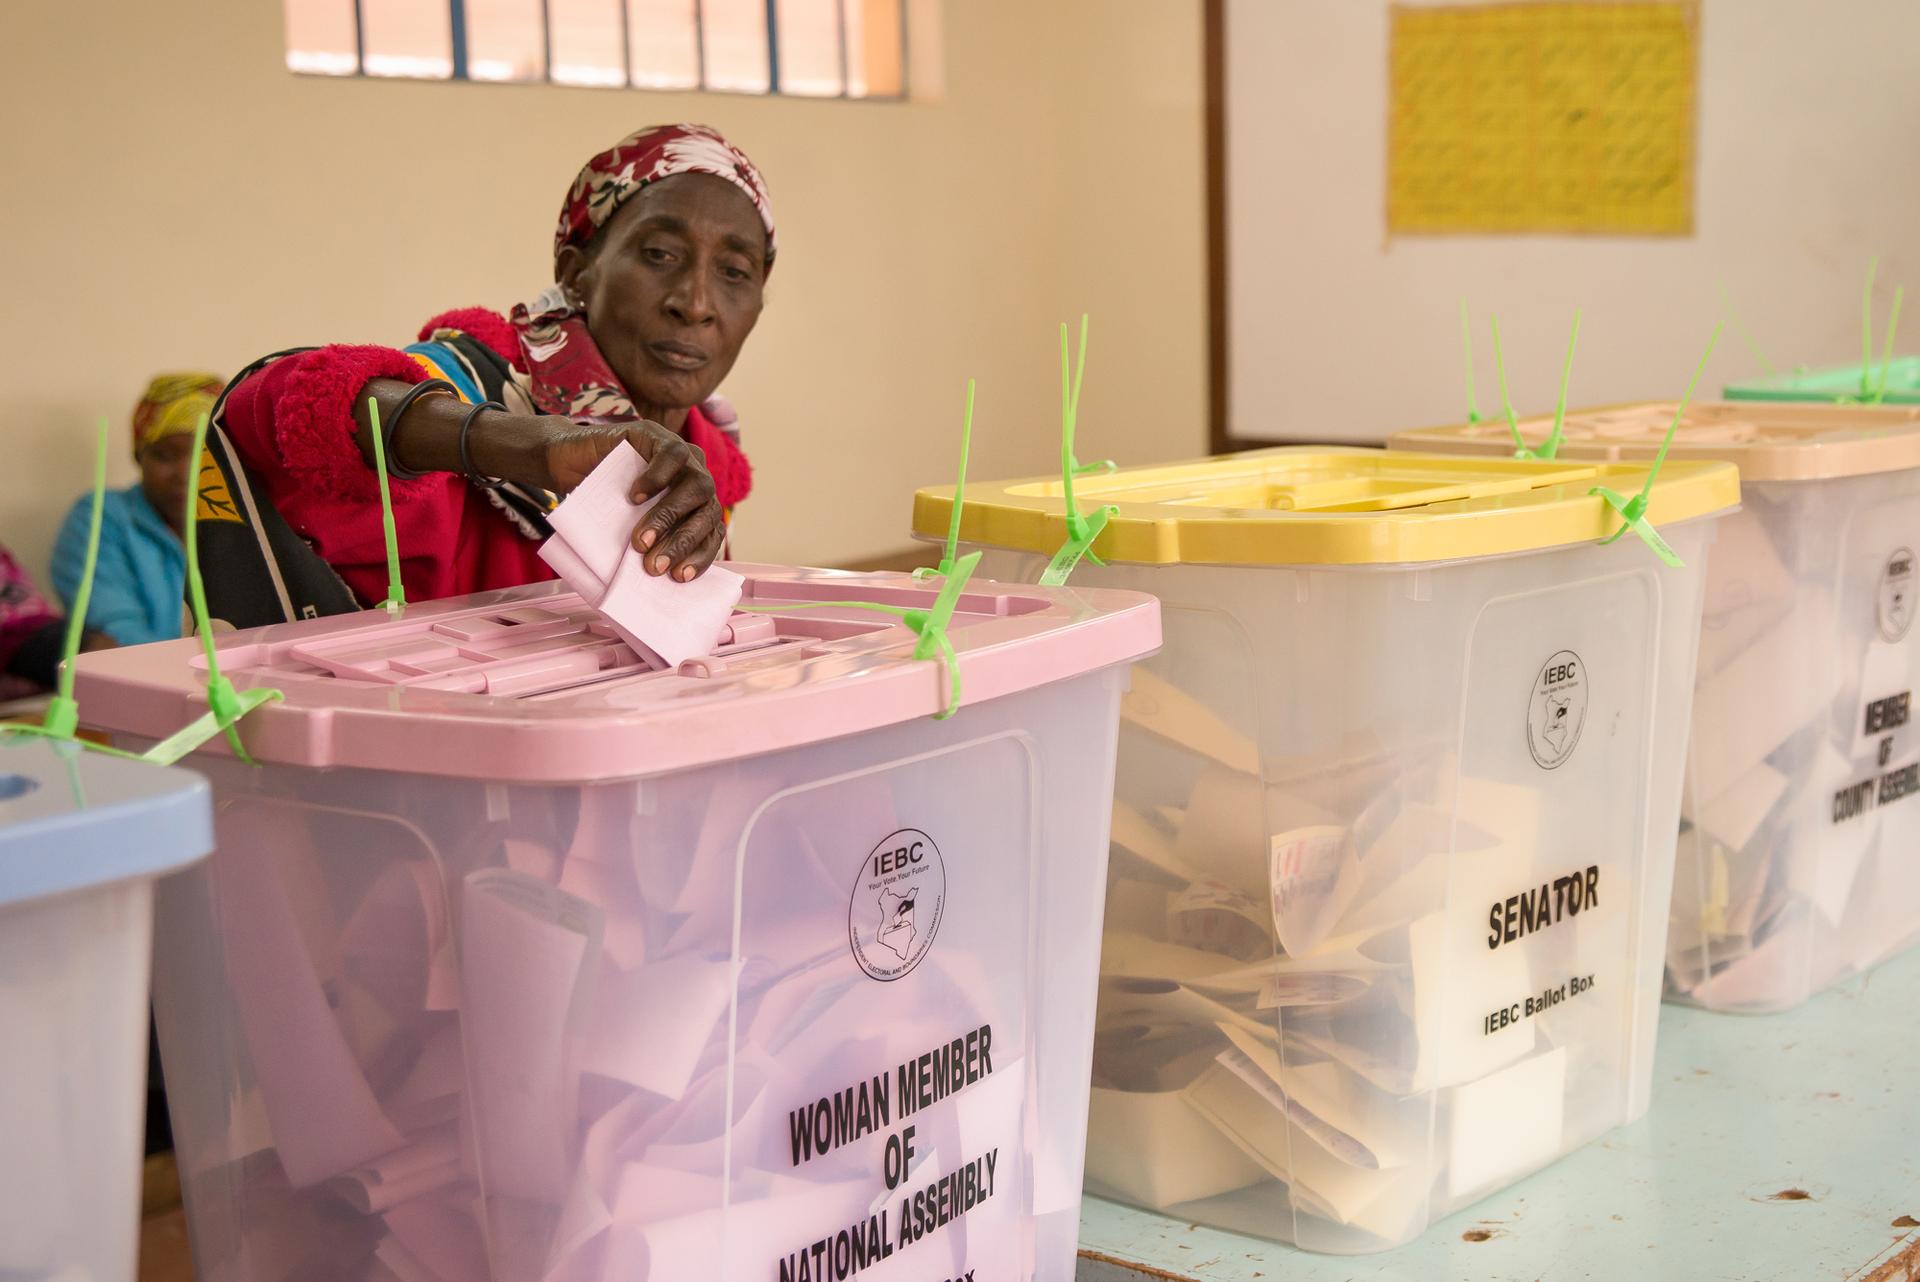 An elderly woman submits her ballot at Kibera Primary School in Nairobi. Many voters withstood long lines and slow registration technology to vote in Tuesday’s elections.